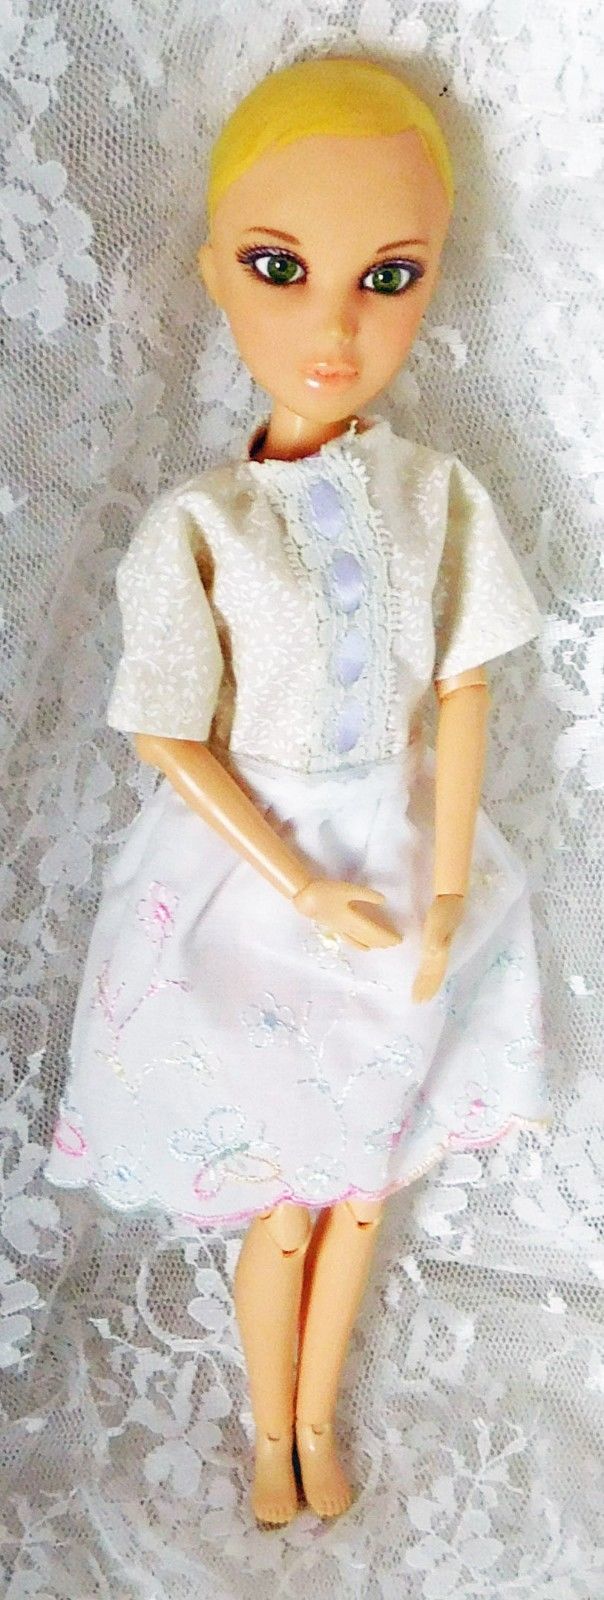 2009 Spin Master Ltd LIV 11 1/2" Doll #00621SWMG - Articulated - Handmade Outfit - £9.53 GBP